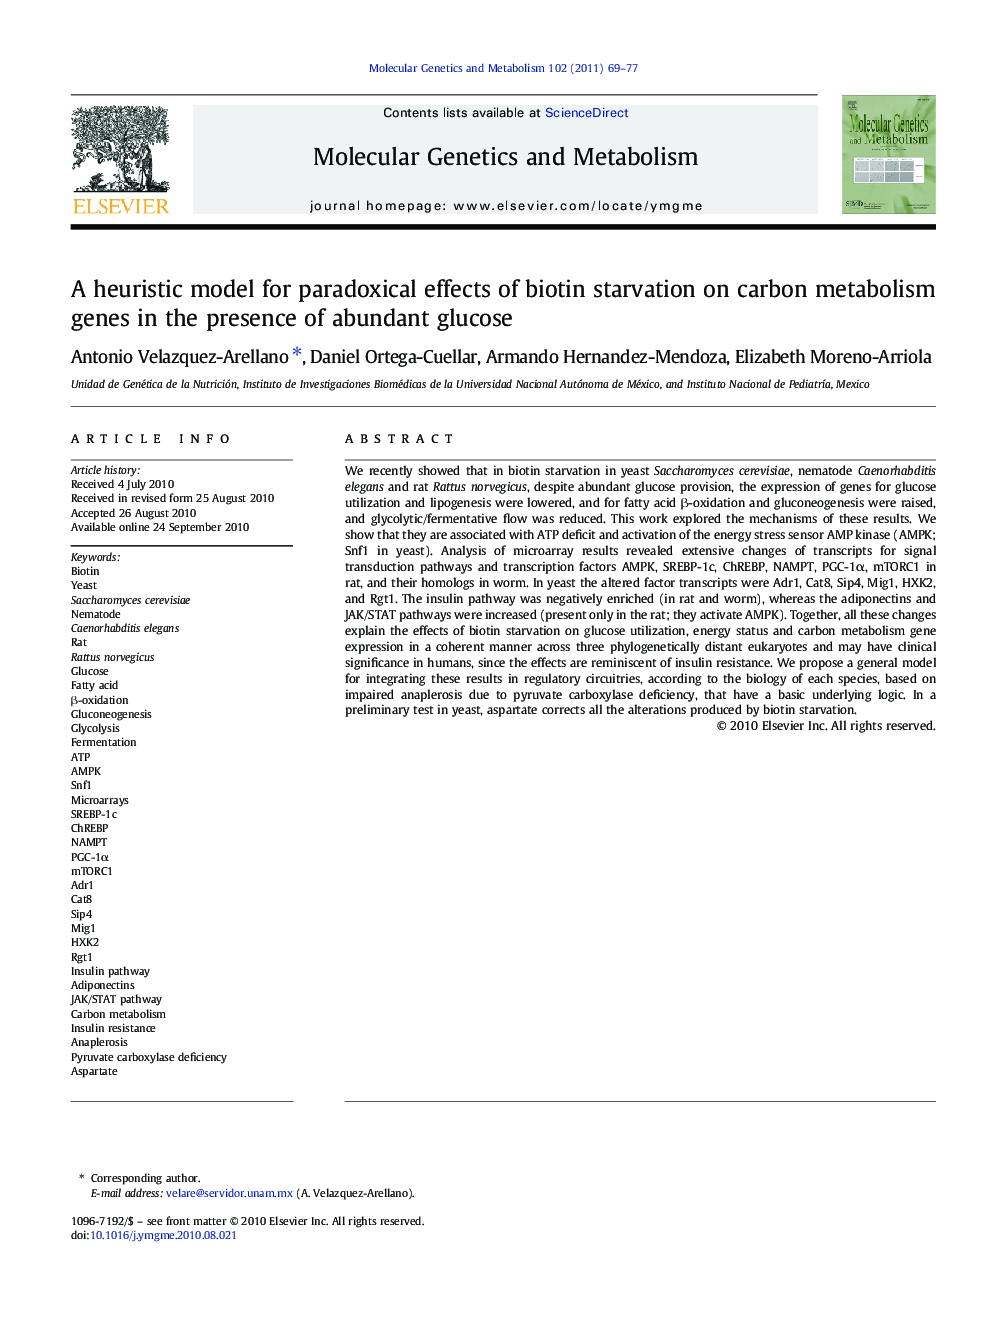 A heuristic model for paradoxical effects of biotin starvation on carbon metabolism genes in the presence of abundant glucose